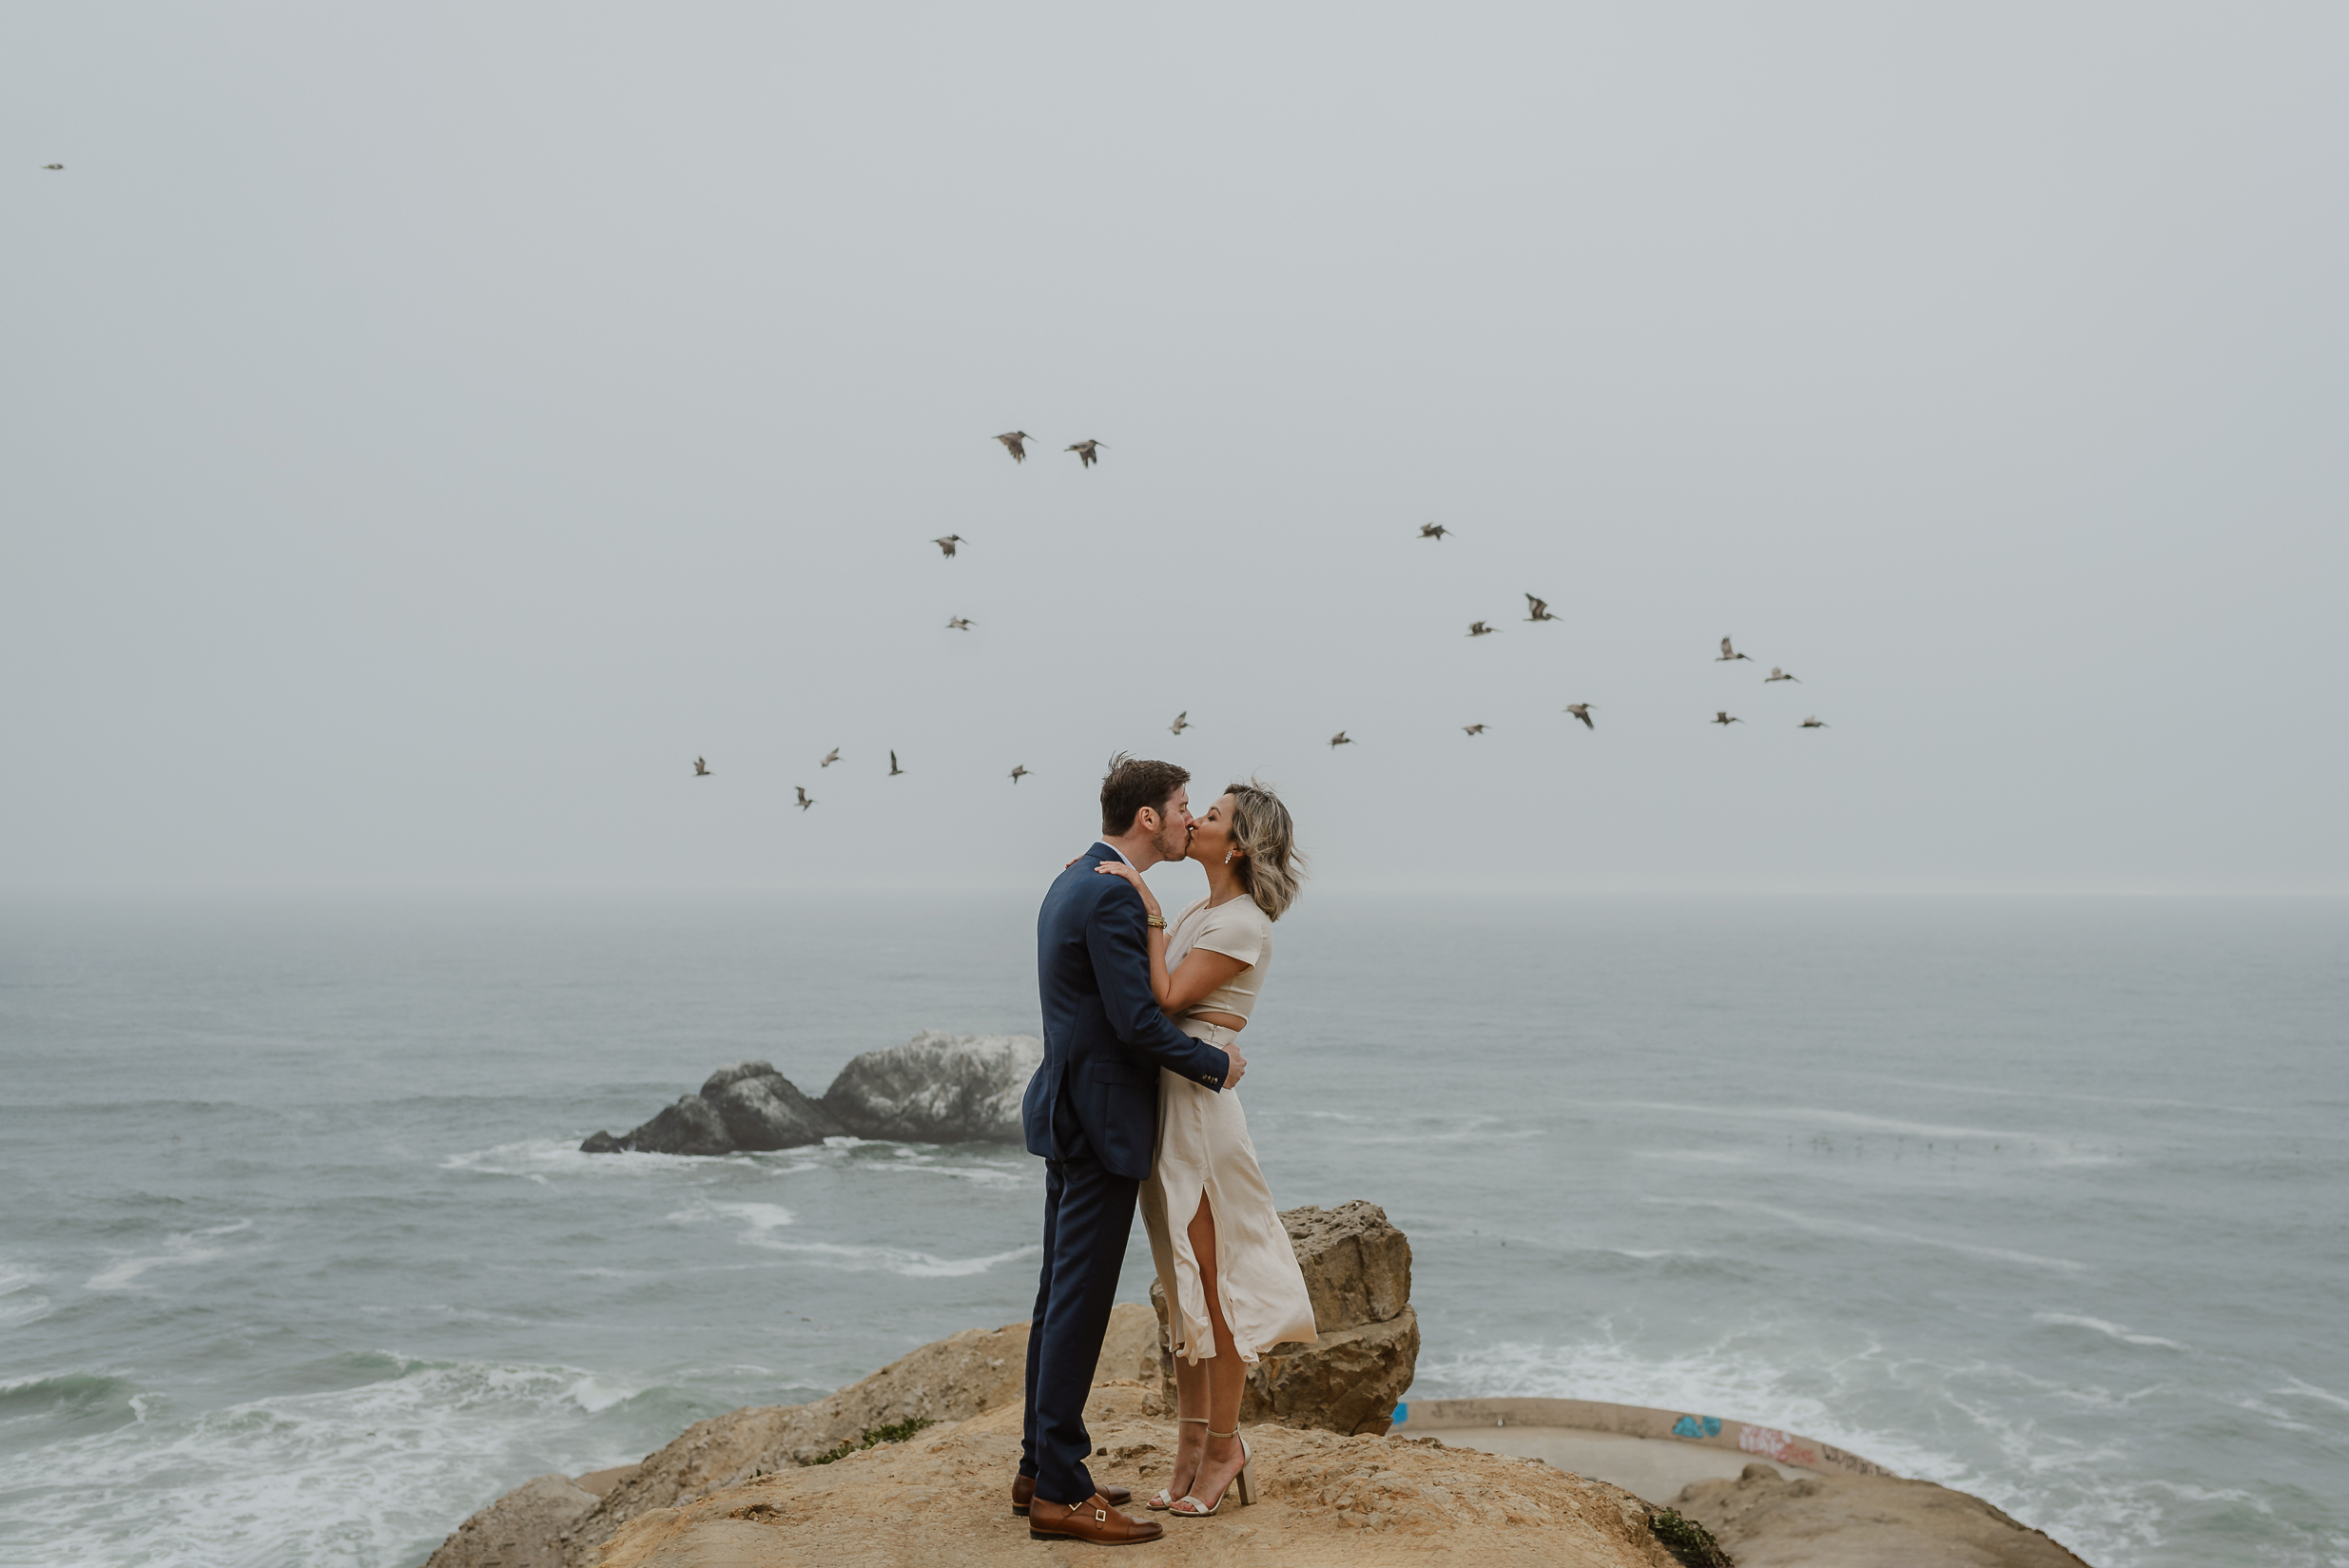 A man and woman kiss on a cliff overlooking the ocean as a flock of birds fly by.